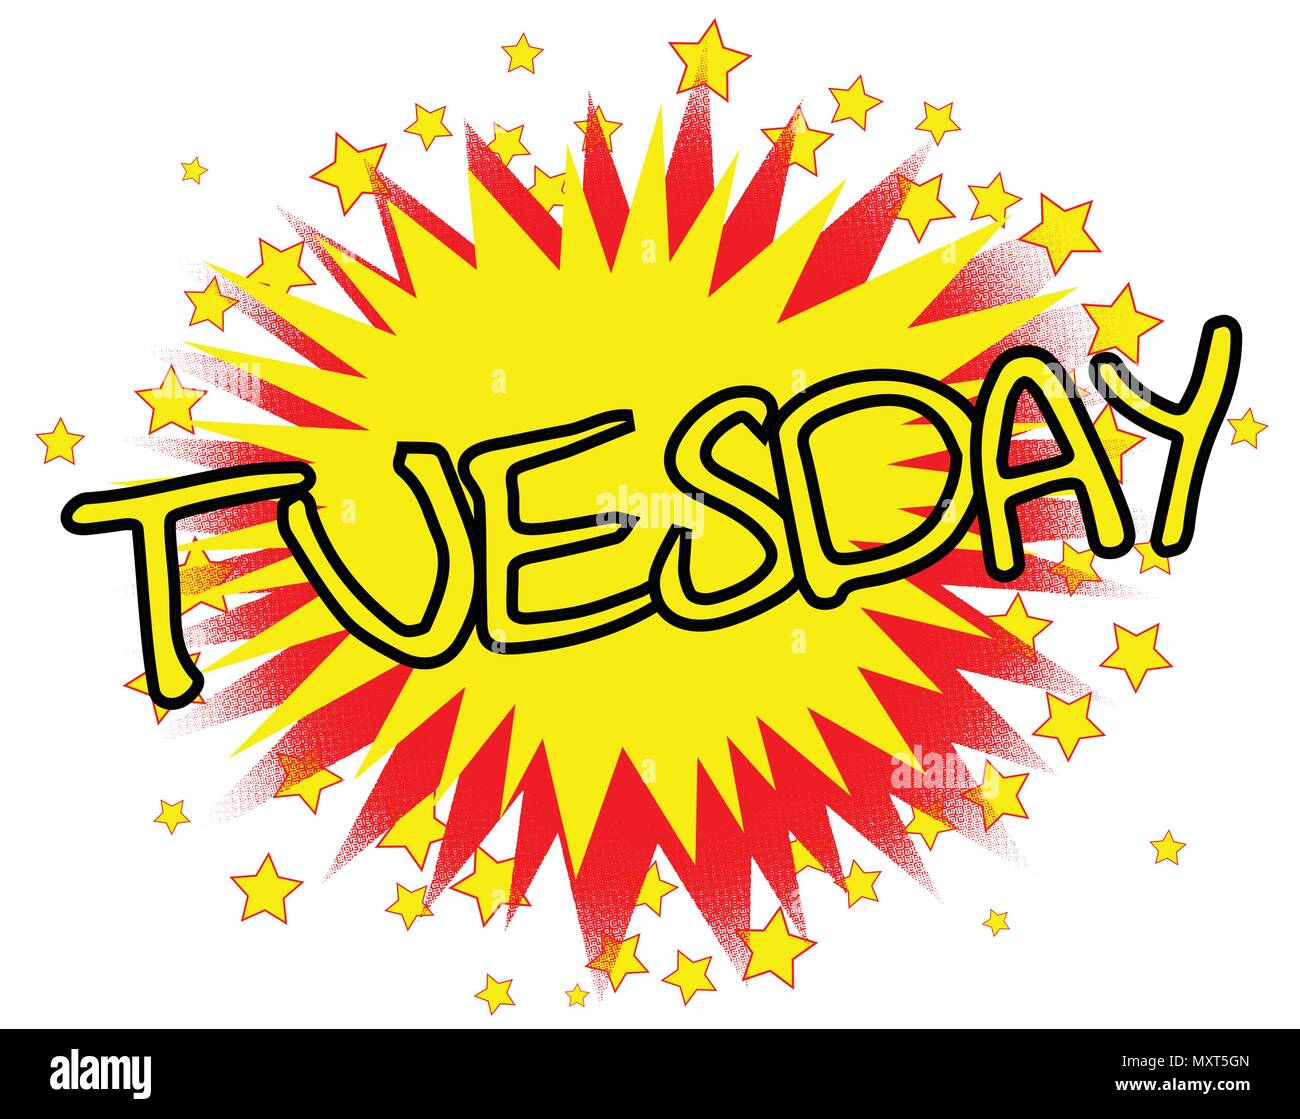 A cartoon style Tuesday splash explosive motif over a white background Stock Vector